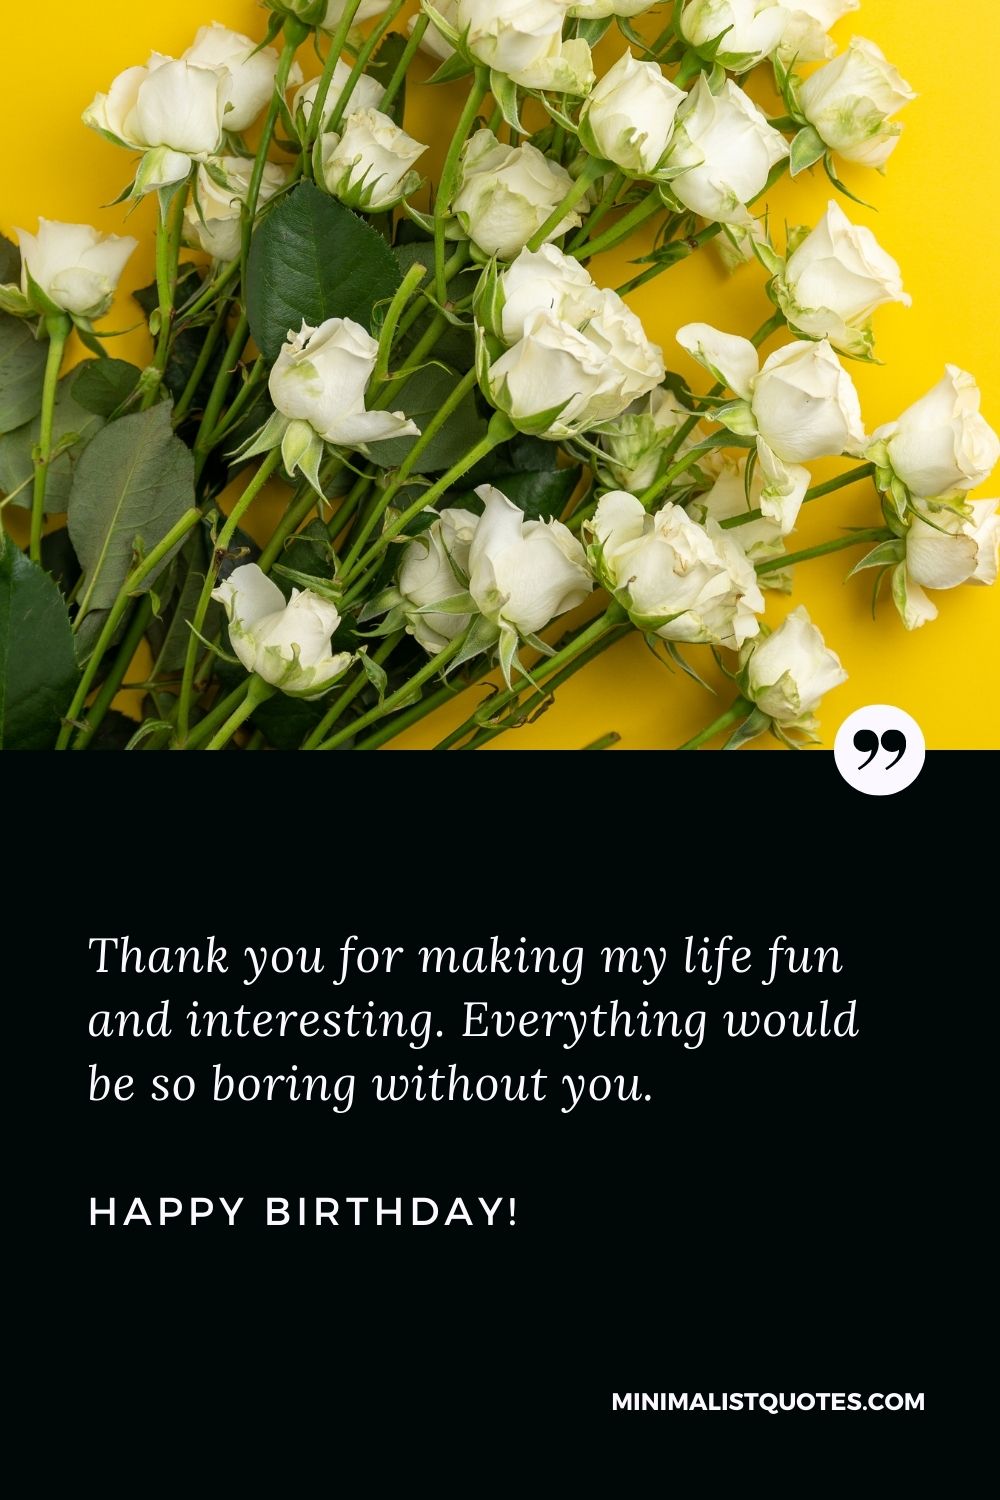 Wish you a very happy birthday: Thank you for making my life fun and interesting. Everything would be so boring without you. Wish you a Happy Birthday!